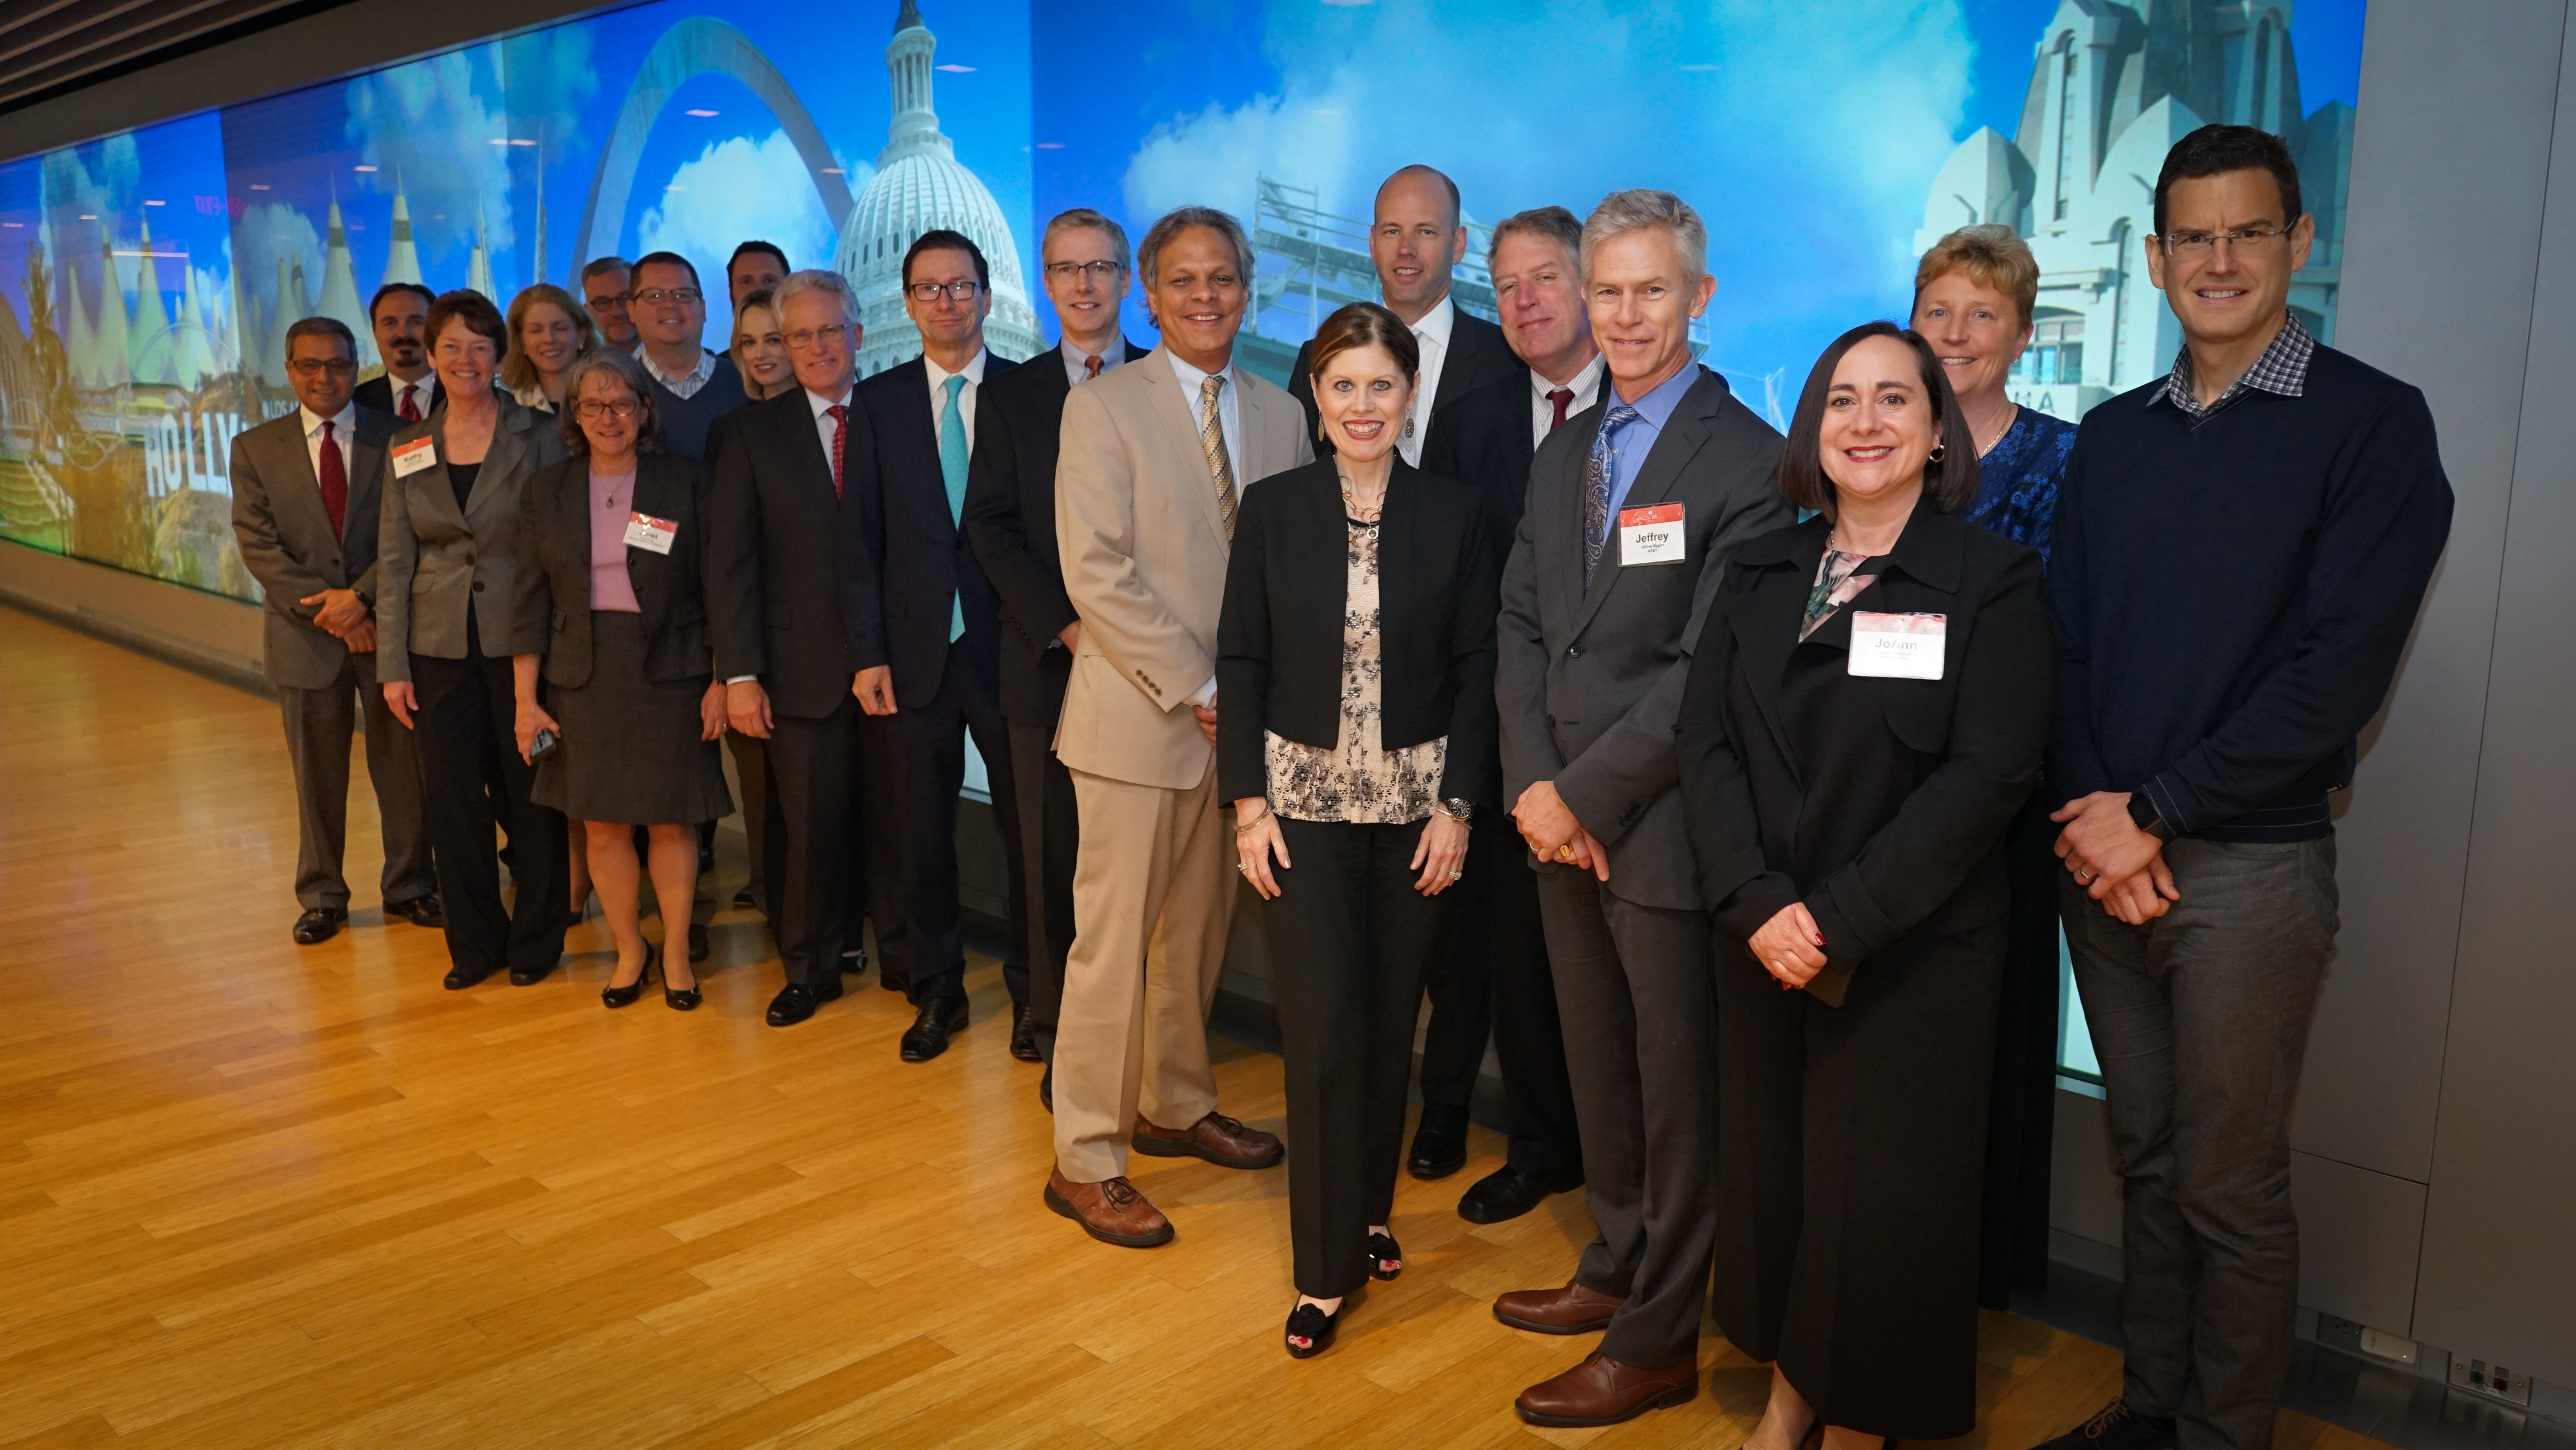 Attendees at the CEO Roundtable Policy Summit